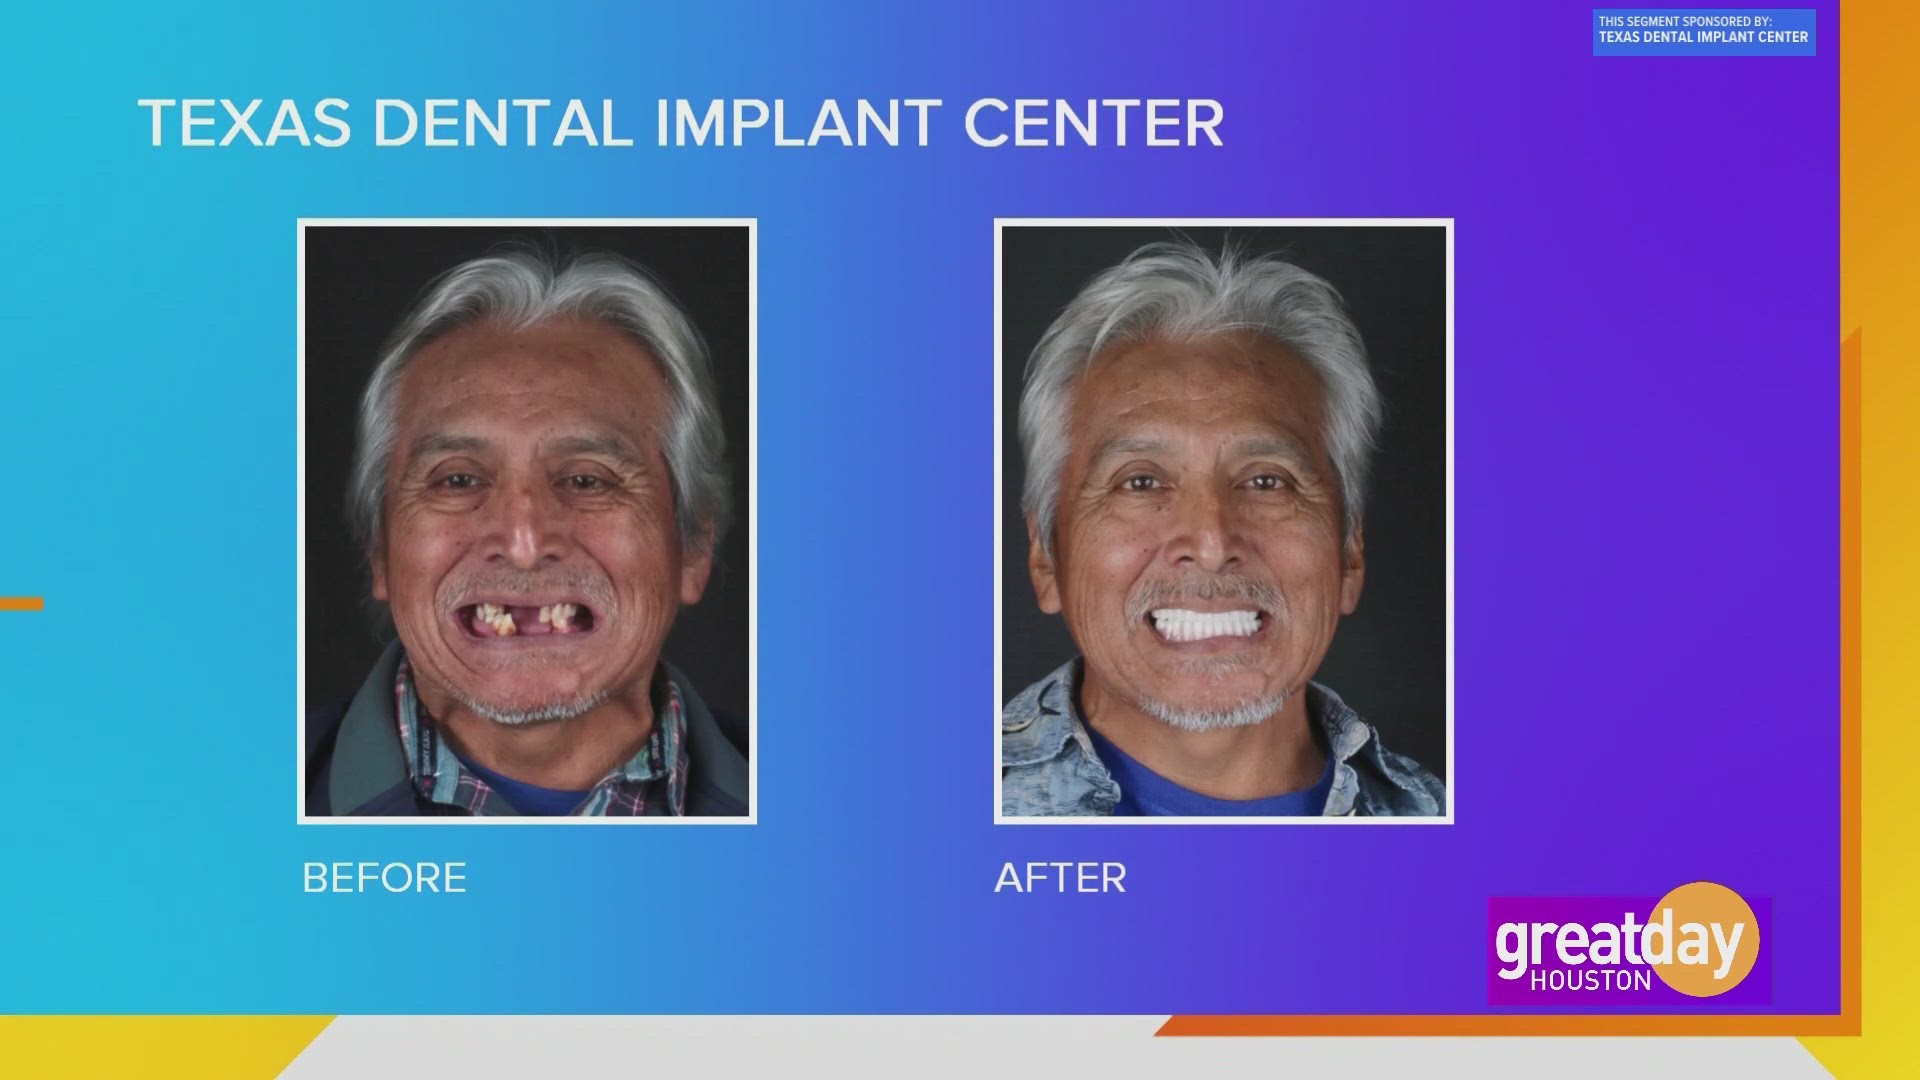 Texas Dental Implant Center can give you the smile of your dreams, no matter what your current situation is.